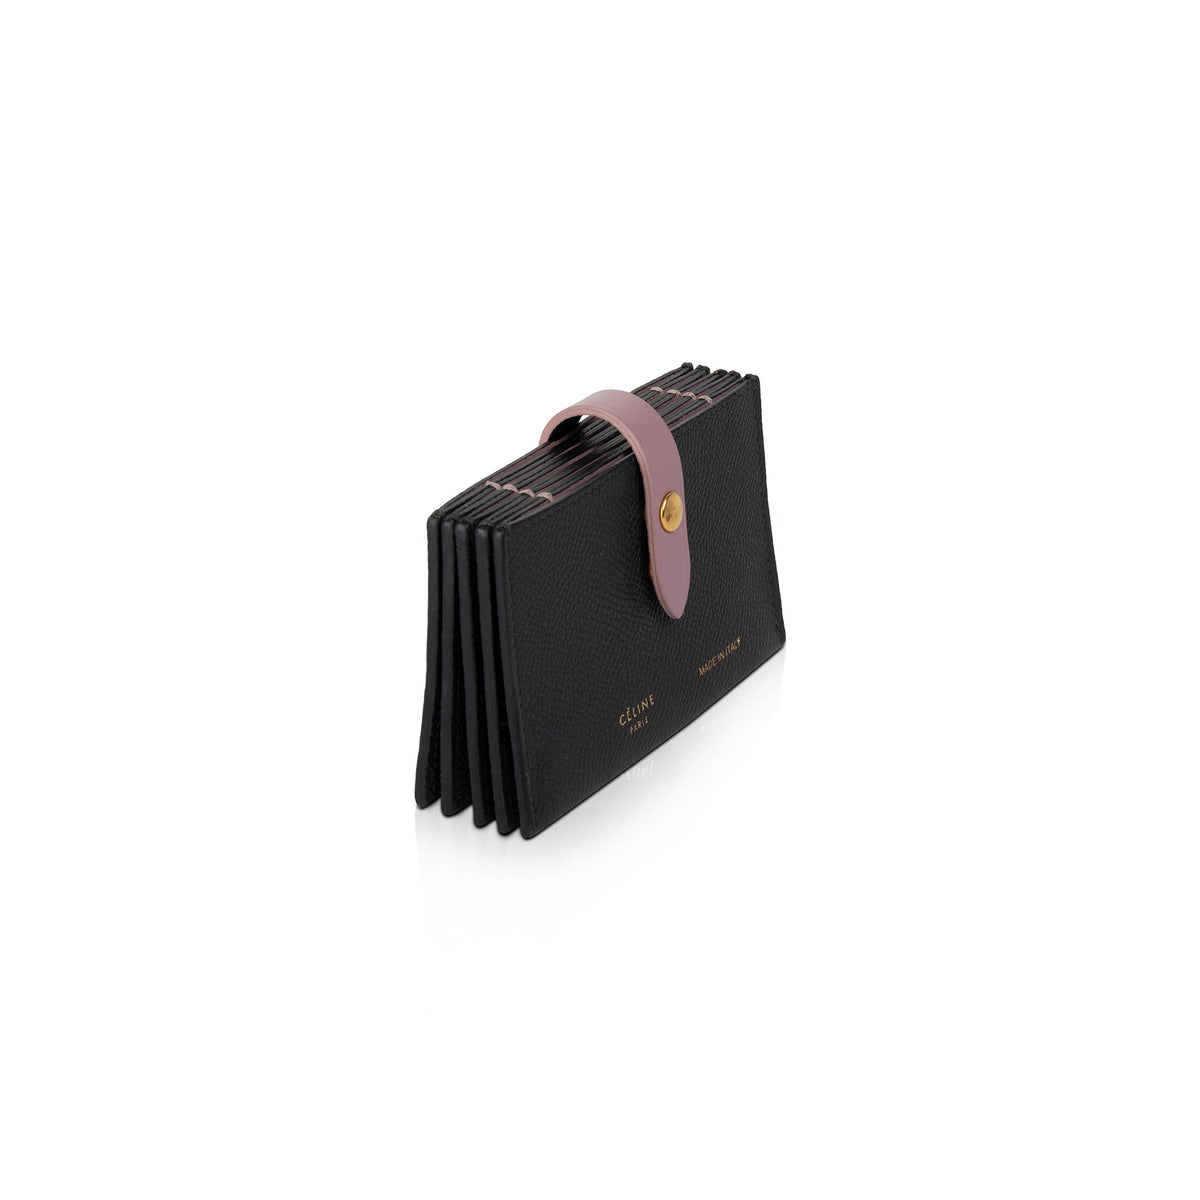 Find official brands and leagues for Celine Accordion Card Holder